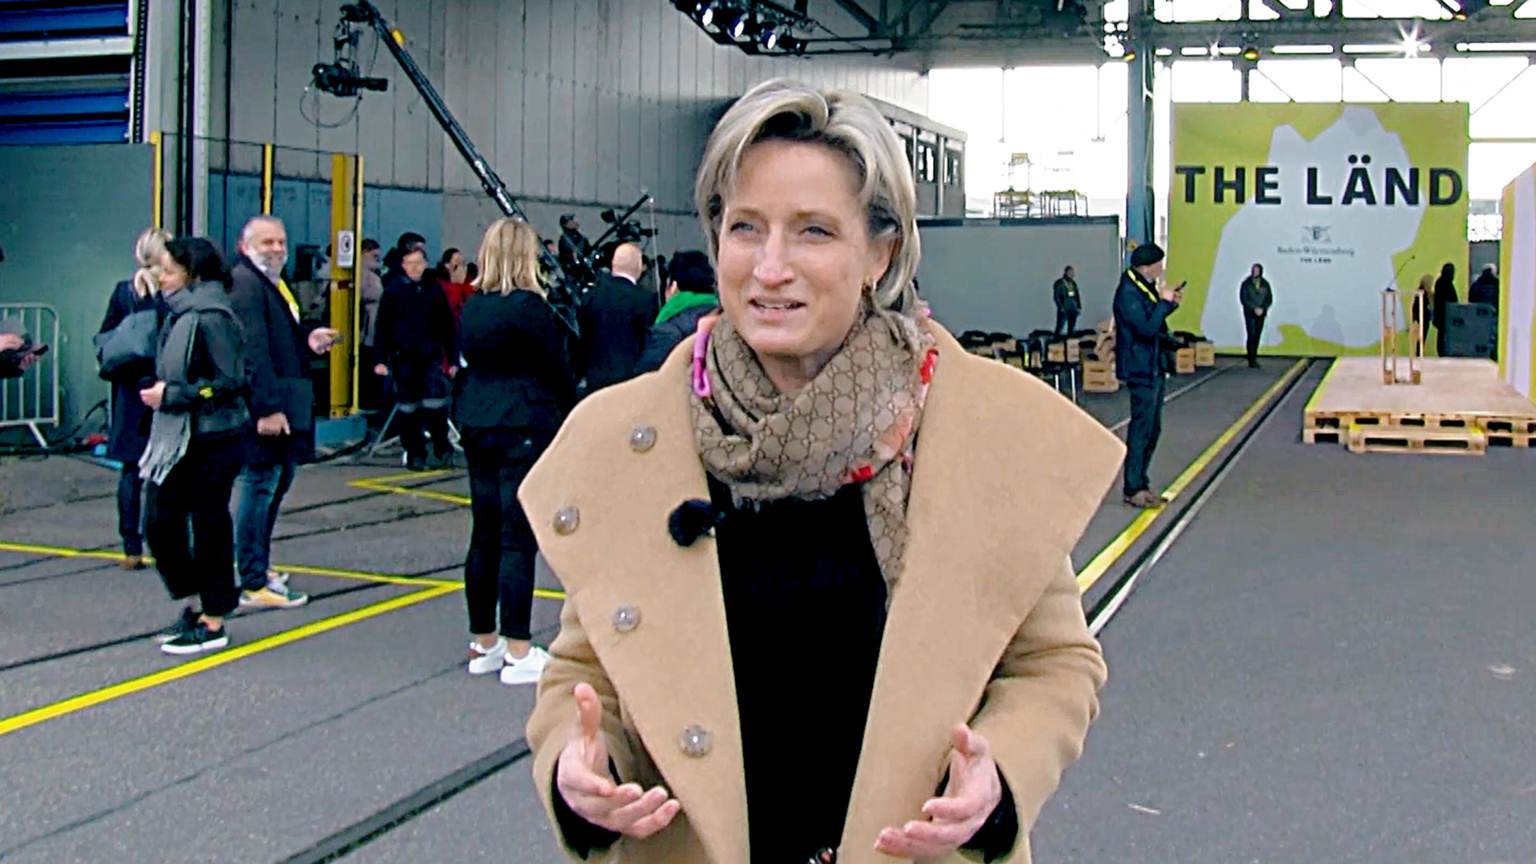 A woman in a coat is standing in the foreground. In the background there are cameras and a big "THE LÄND" poster.